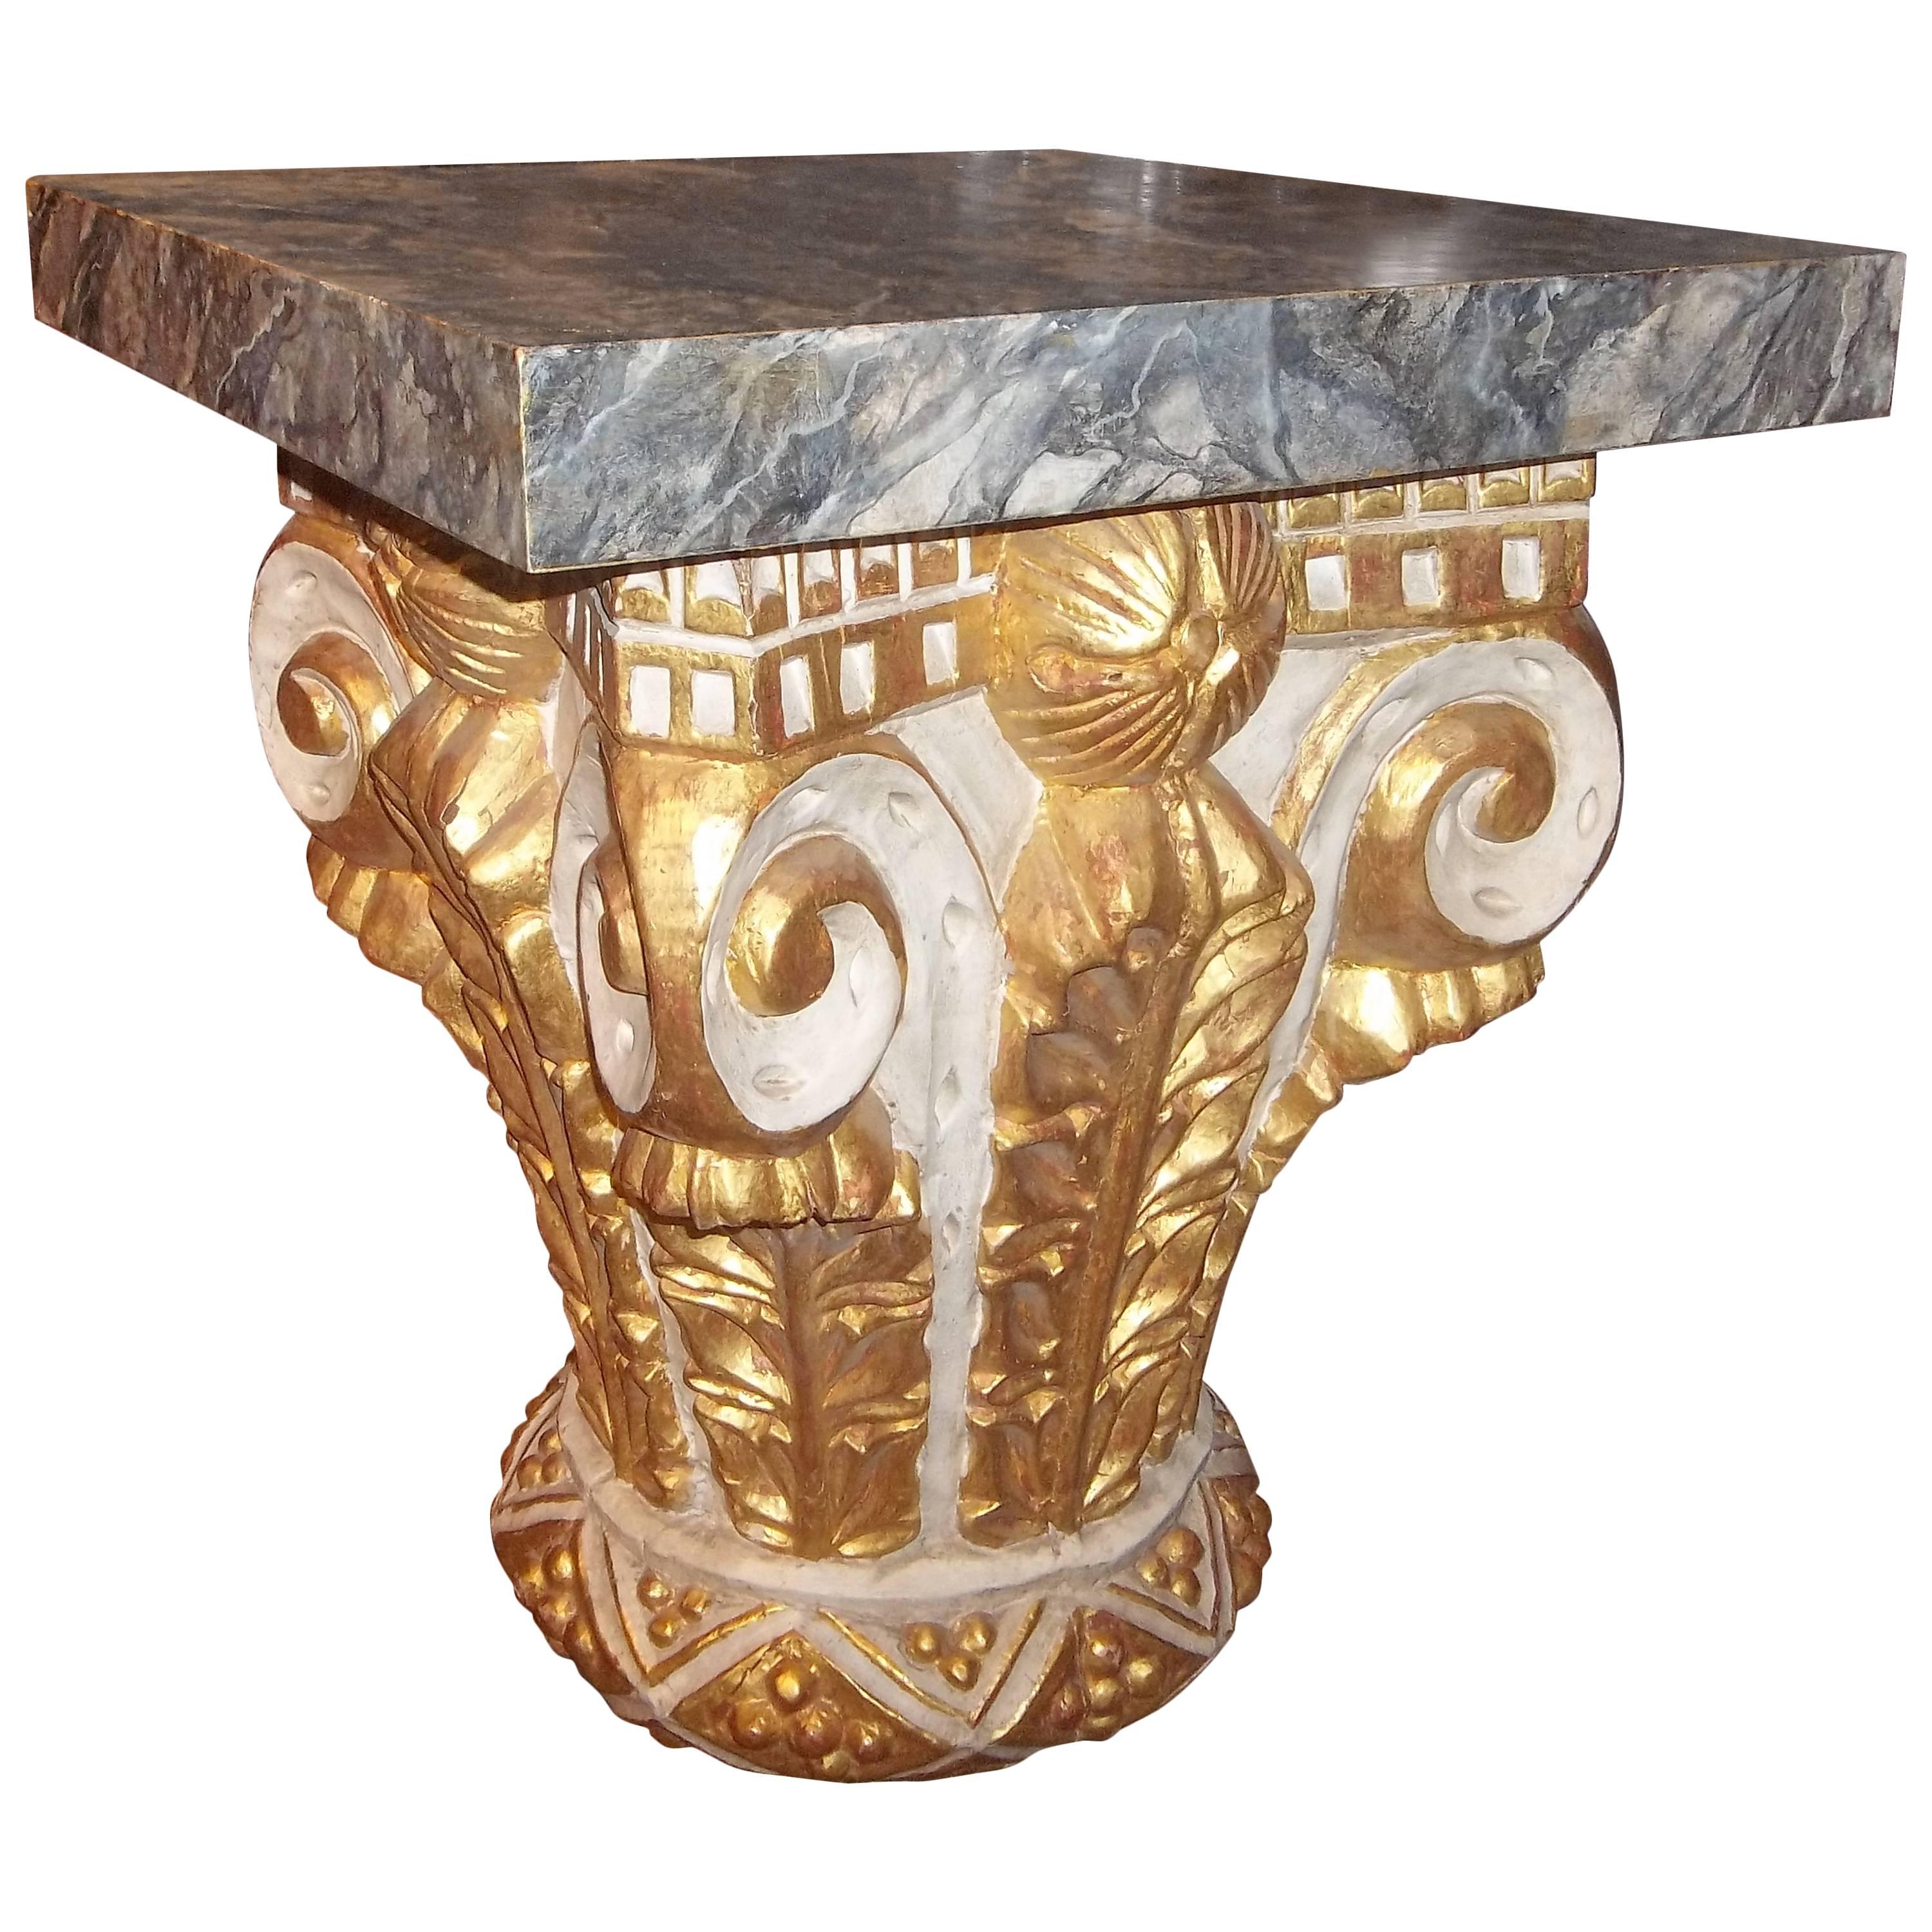 Giltwood and Paint Corinthian Column Capital Fragment Now a Table